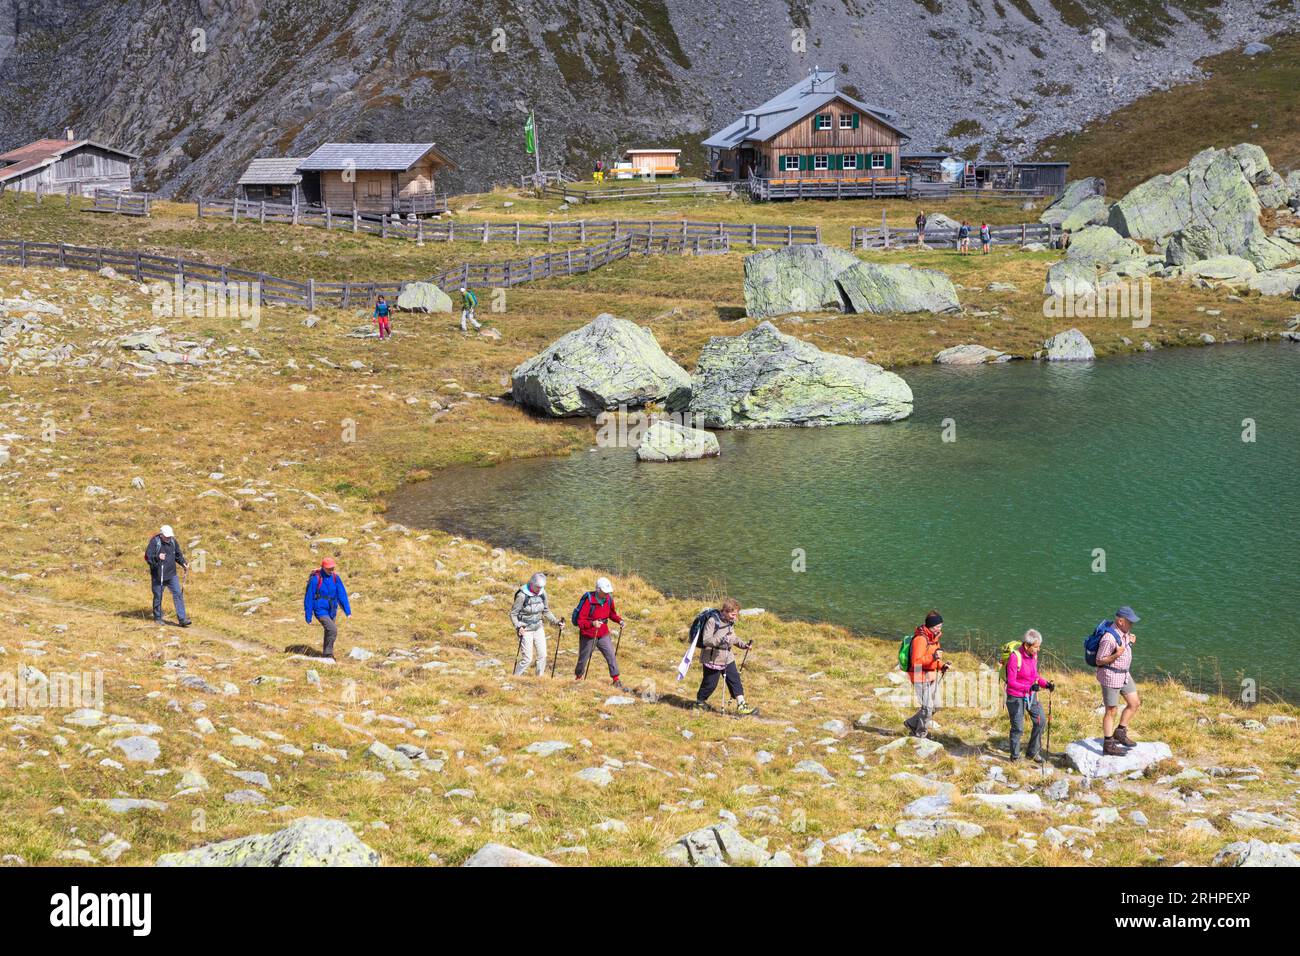 Austria, East Tyrol, district of Lienz, Kartitsch. hikers passing in front of the hut Obstansersee Hütte in the Carnic Alps Stock Photo